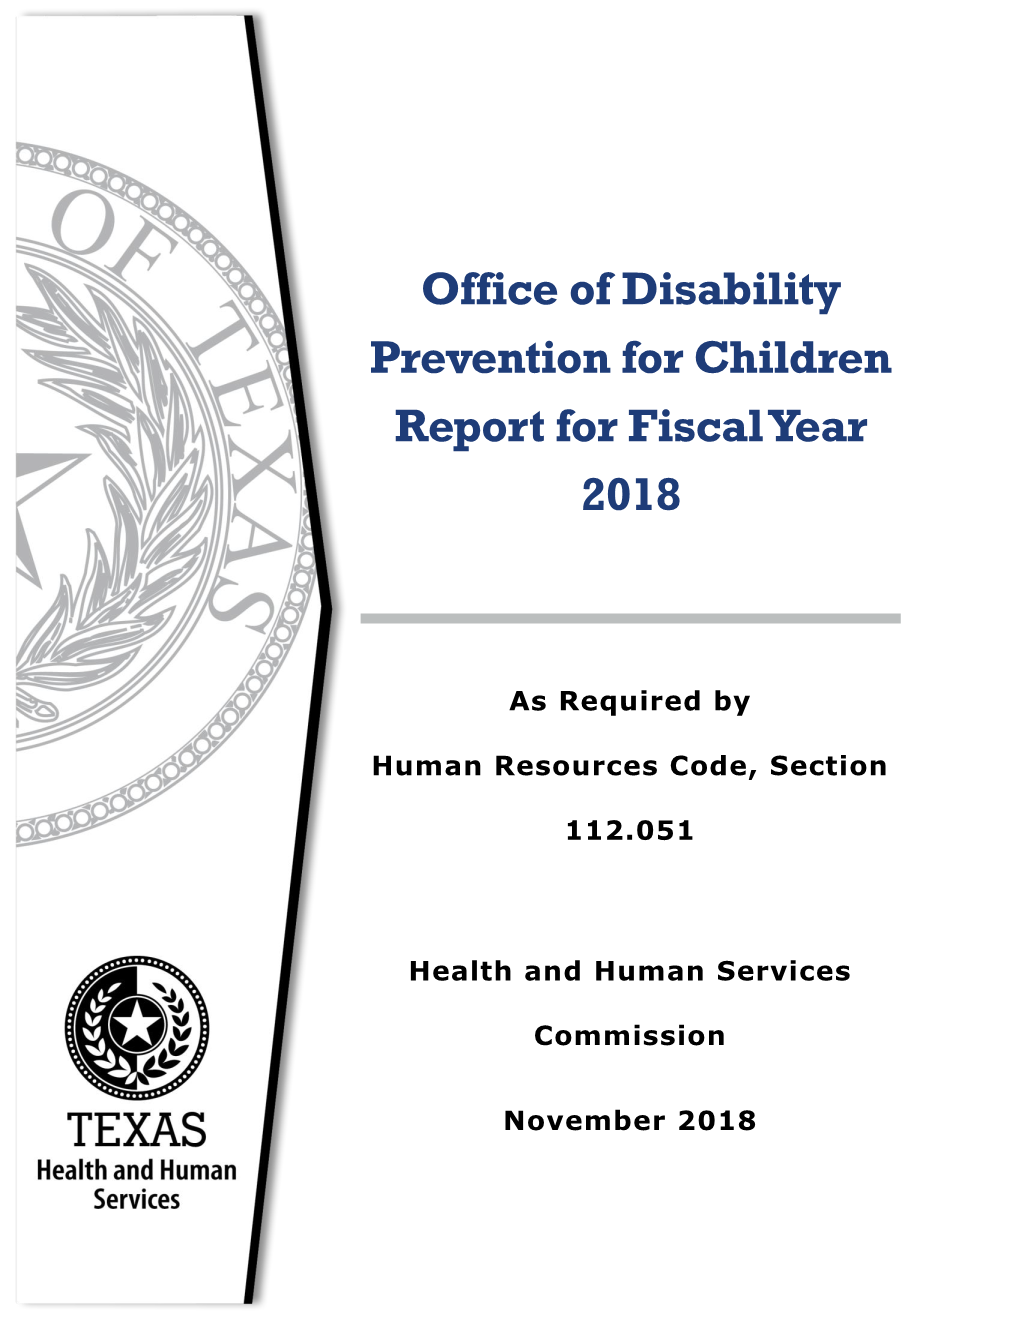 Office of Disability Prevention for Children Report for Fiscal Year 2018